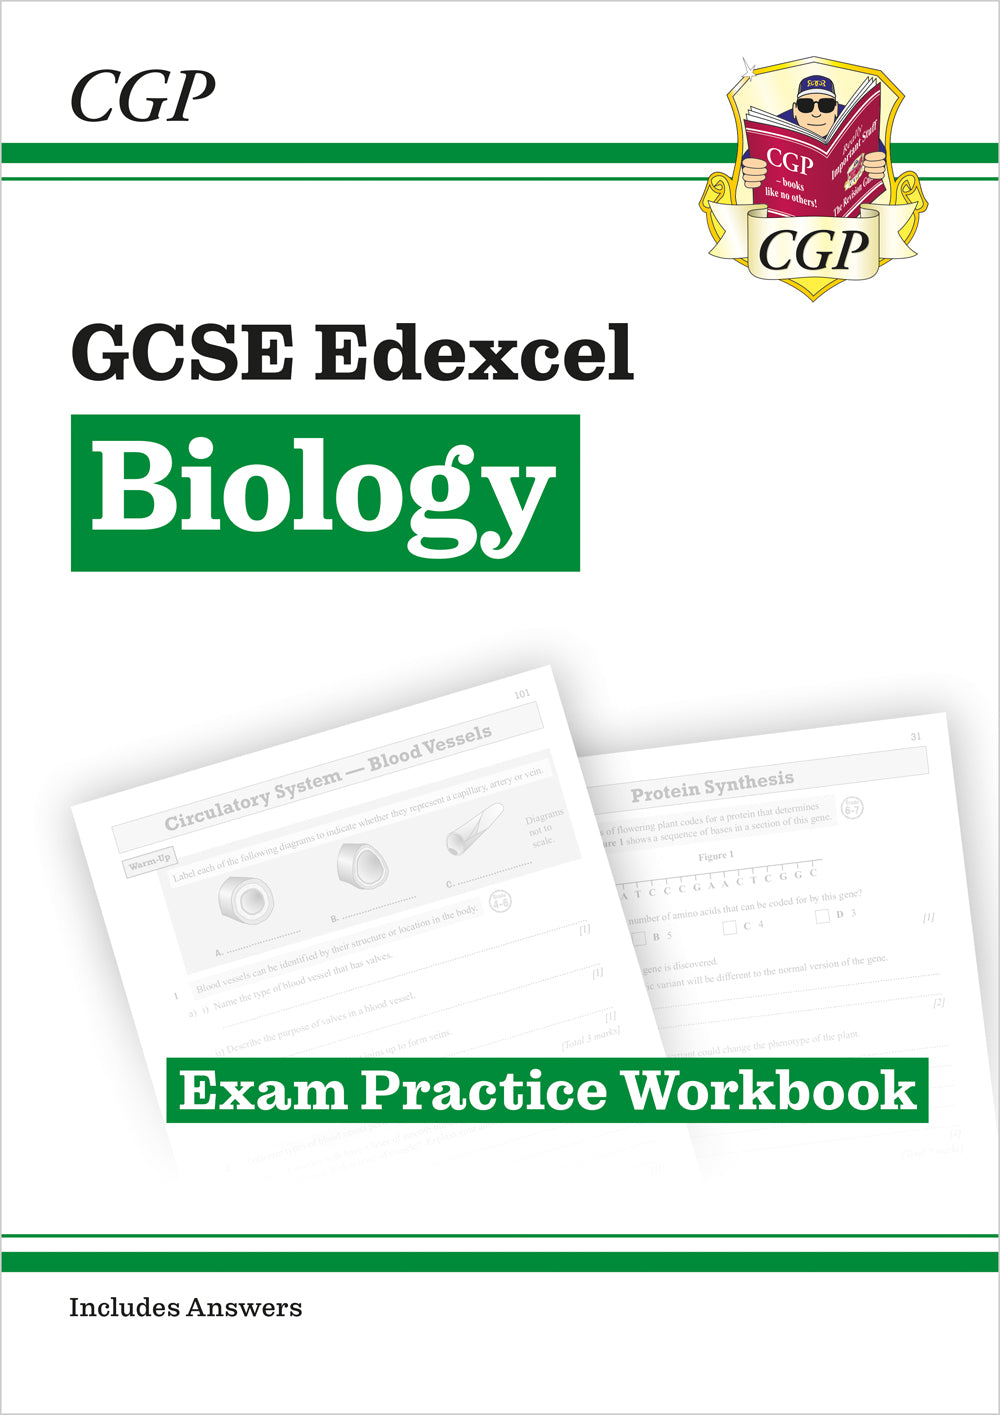 New GCSE Science Revision Guide and Workbook Bundle